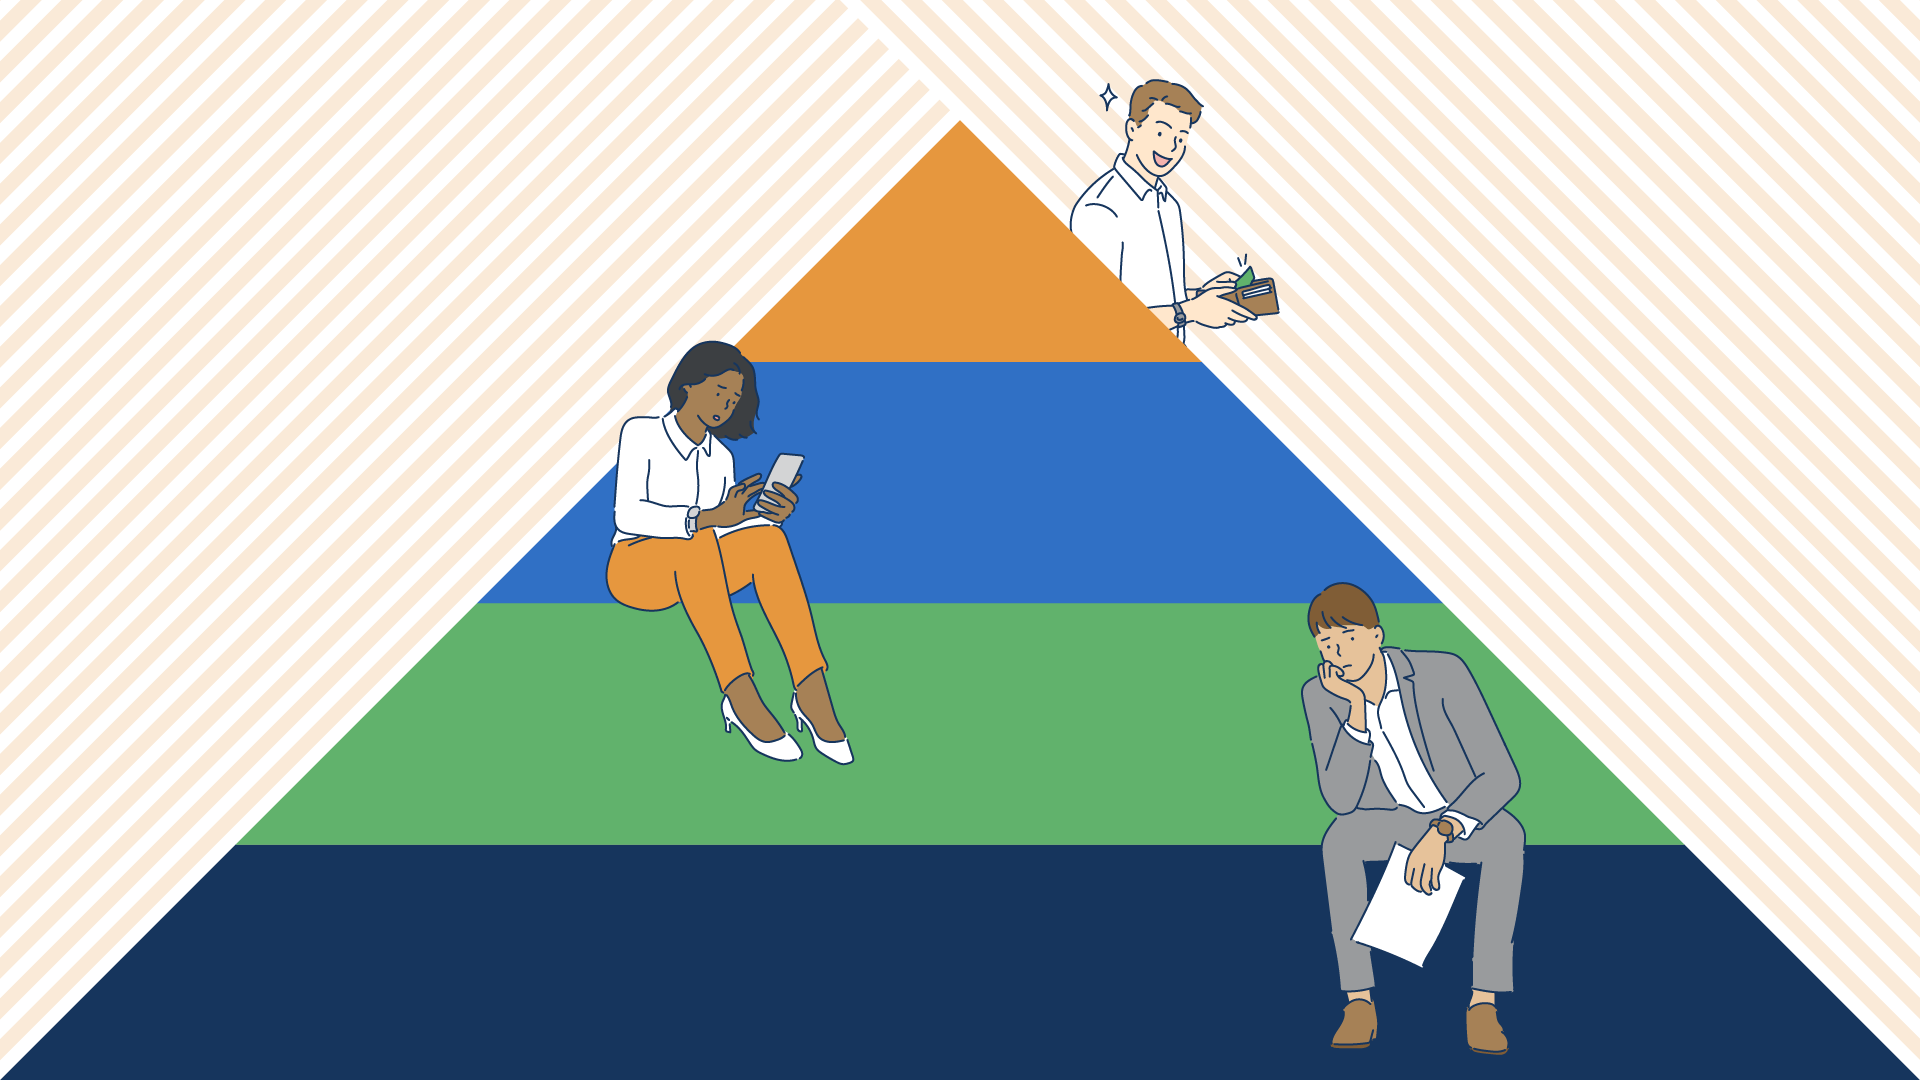 MLM workers sitting on pyramid